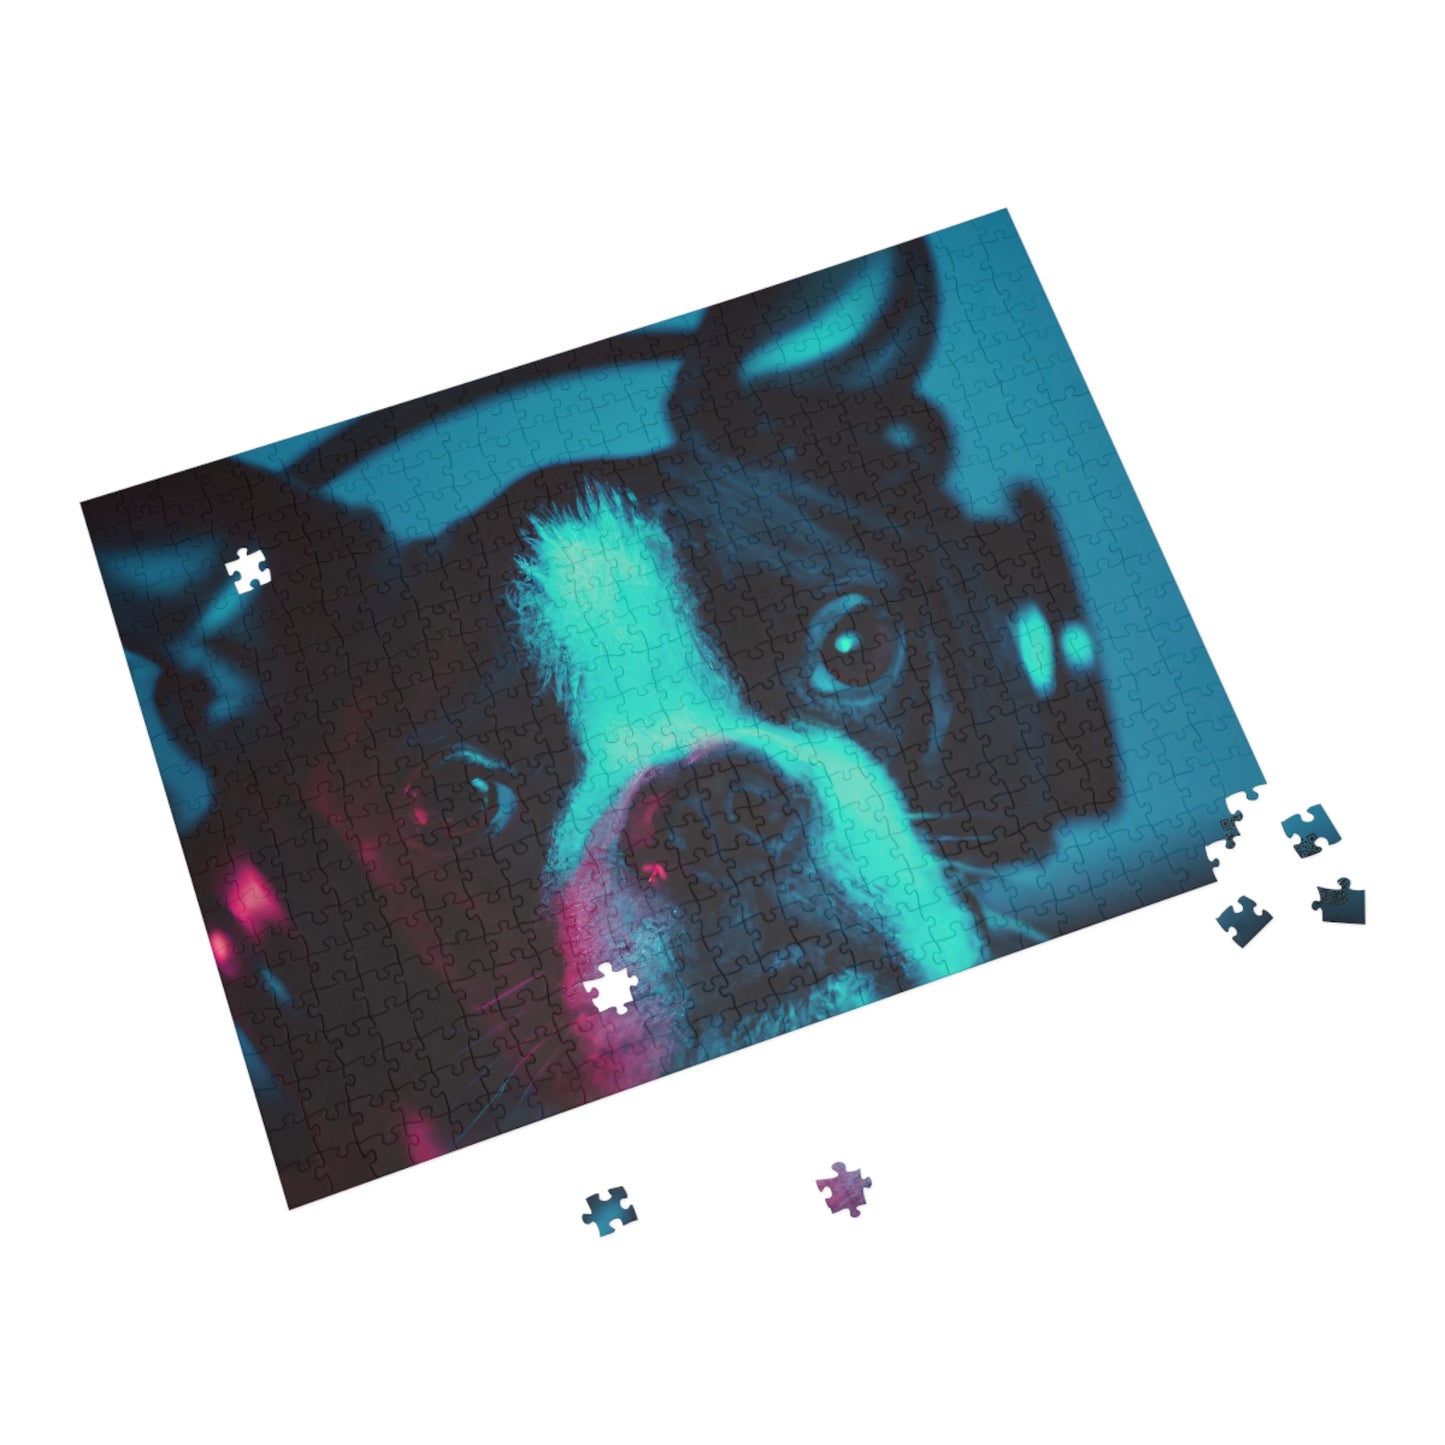 Lord/Lady Winwood of Boston - Boston Terrier - Puzzle